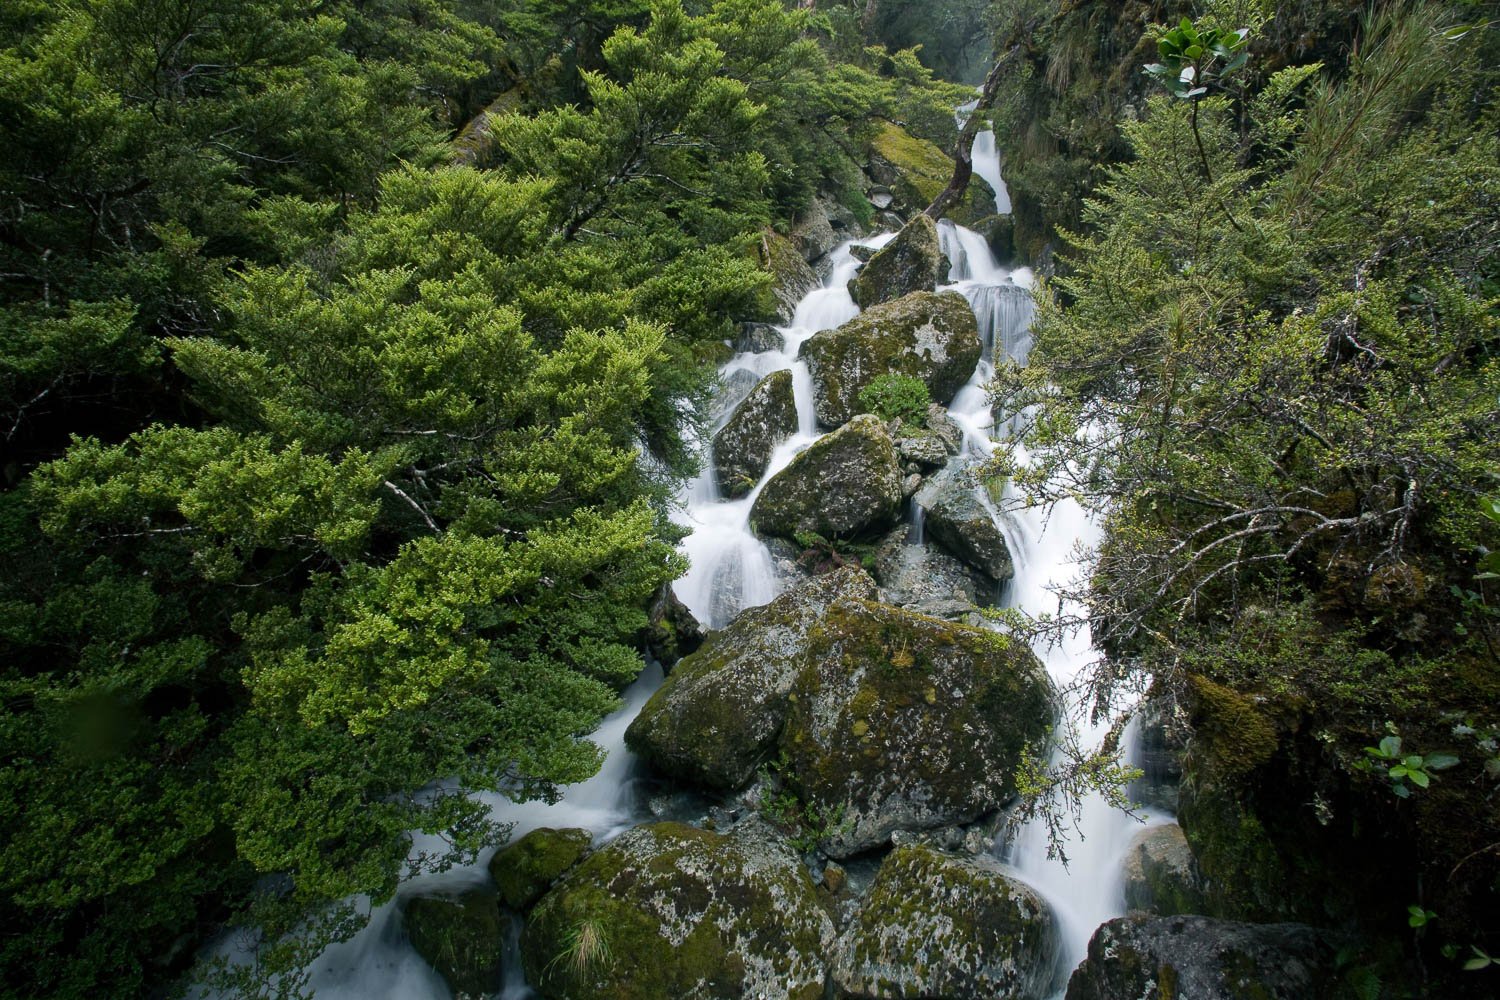 Long waterfall from a green mound in a small lake, Roaring Creek, Routeburn Track - New Zealand